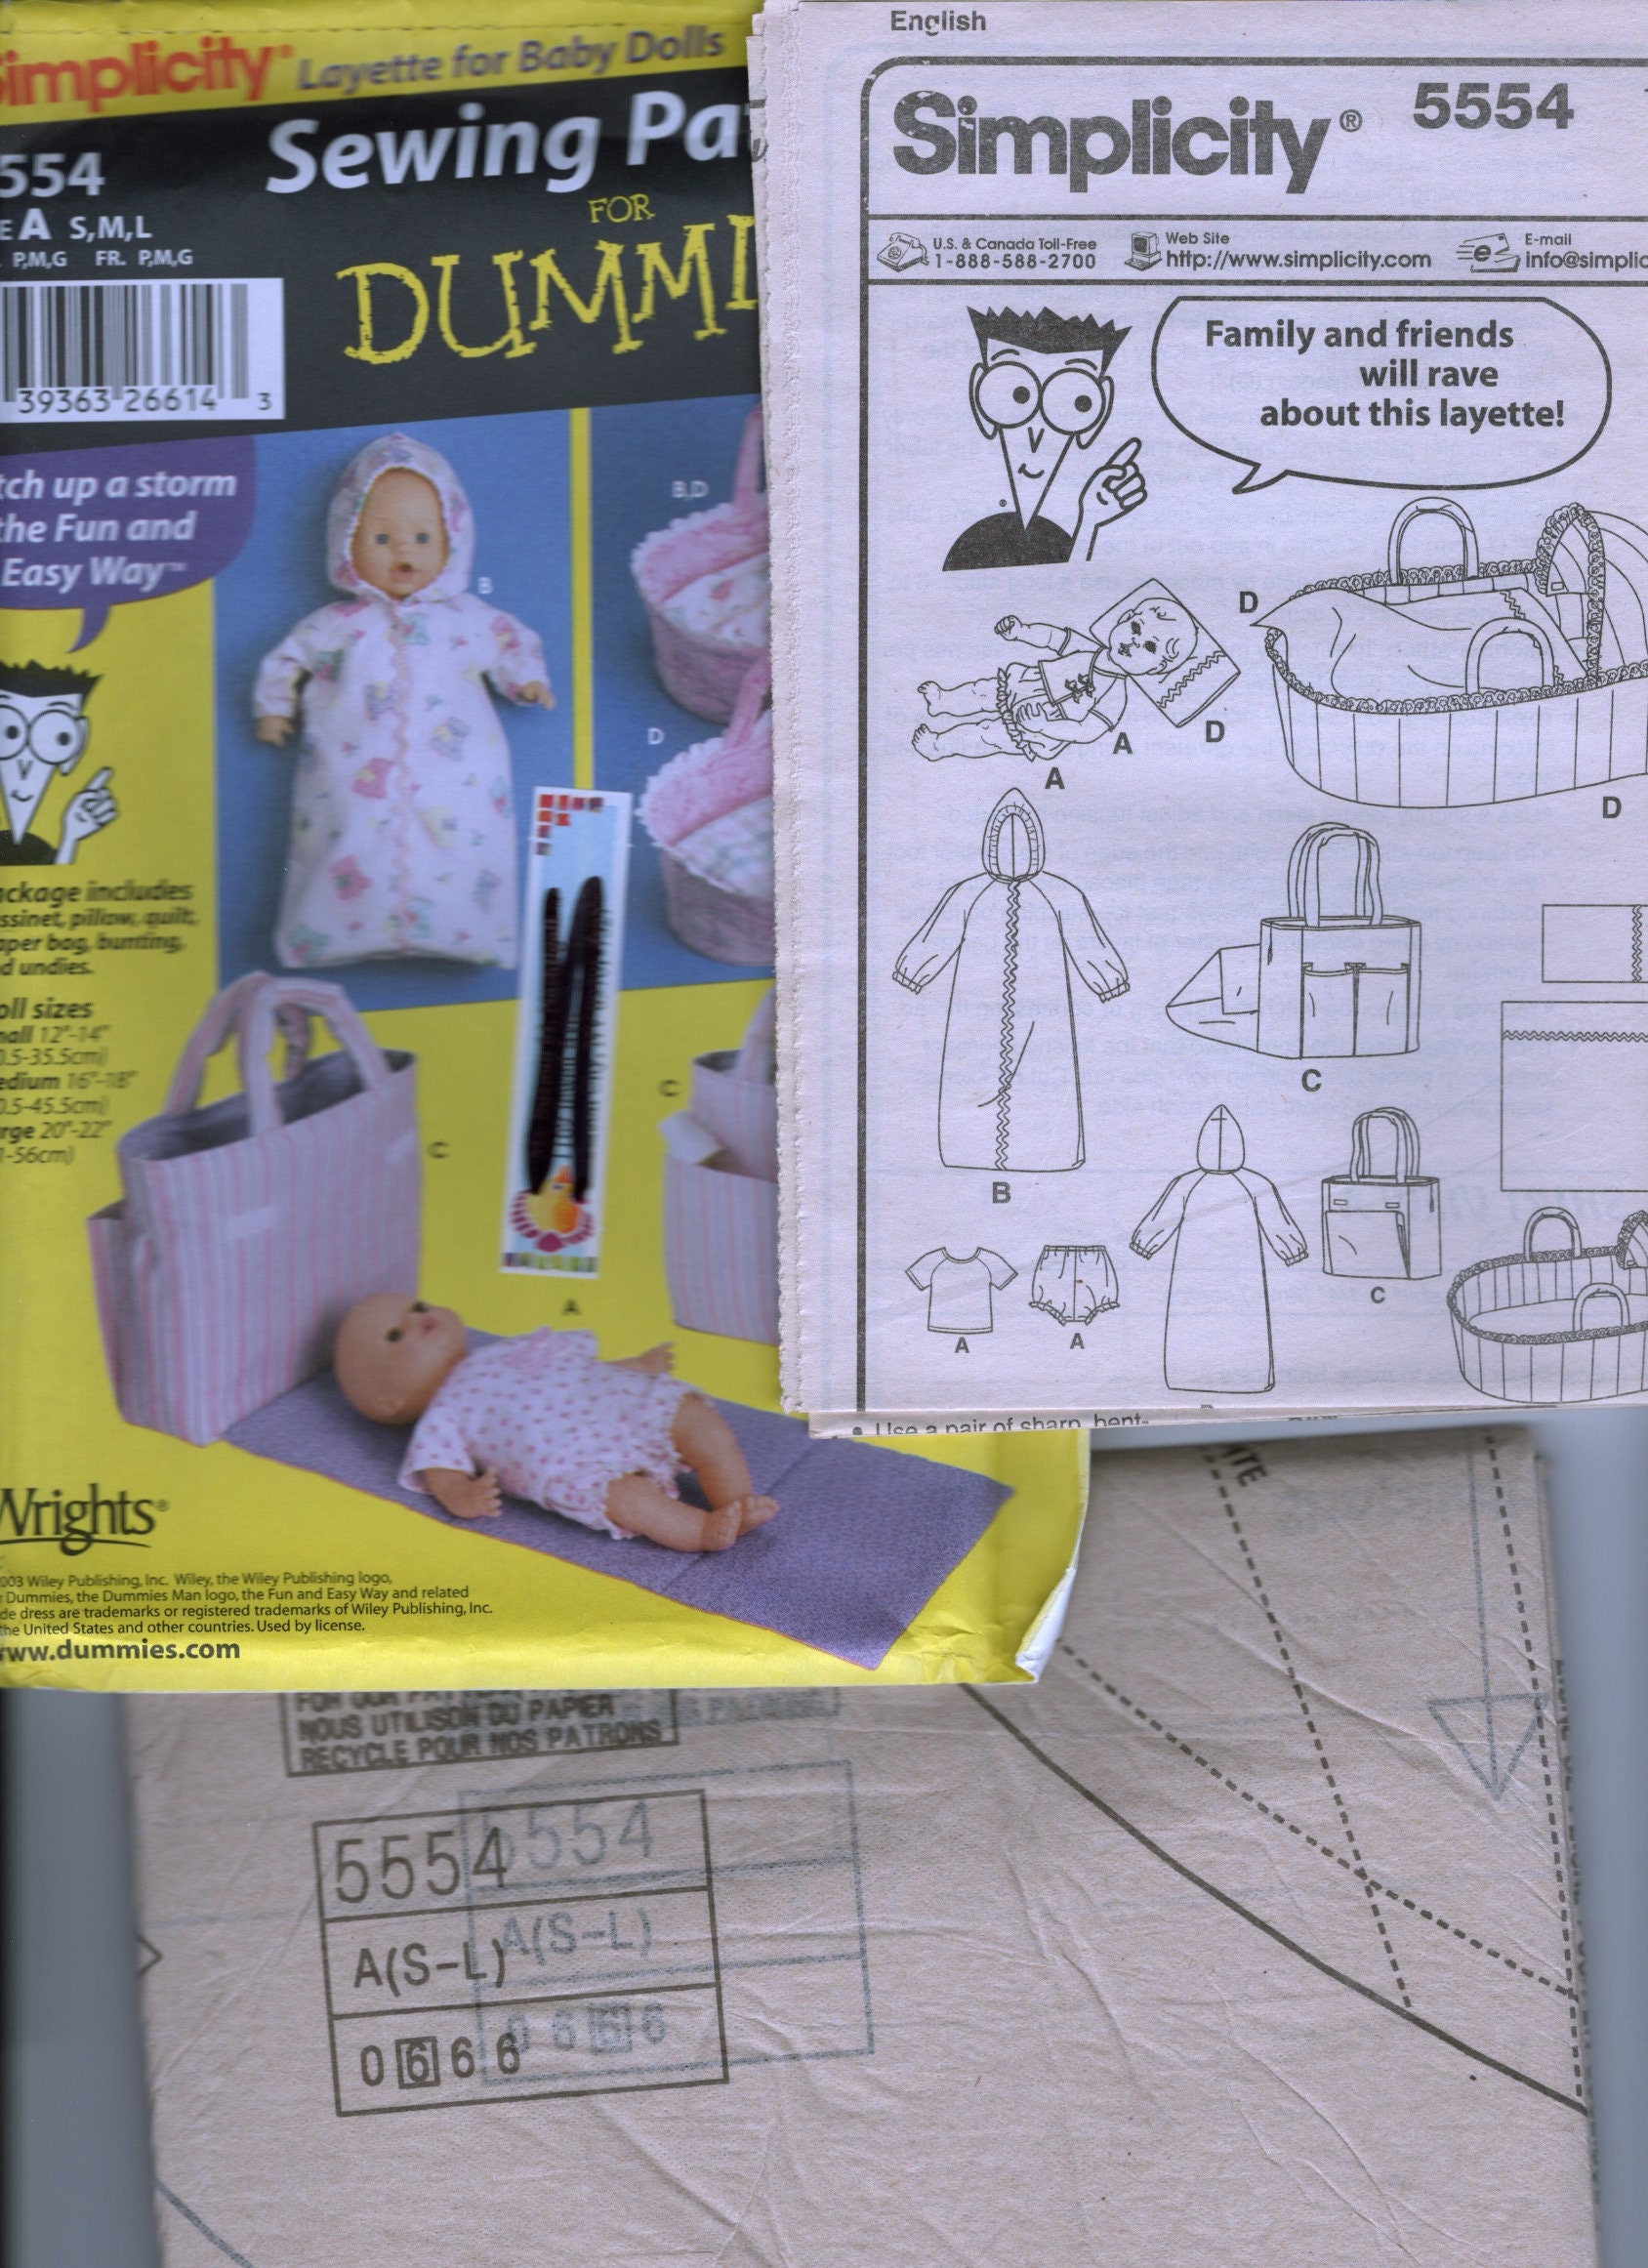 2003 Simplicity 5554 Sewing Patterns for Dummies Layette for Baby Dolls 